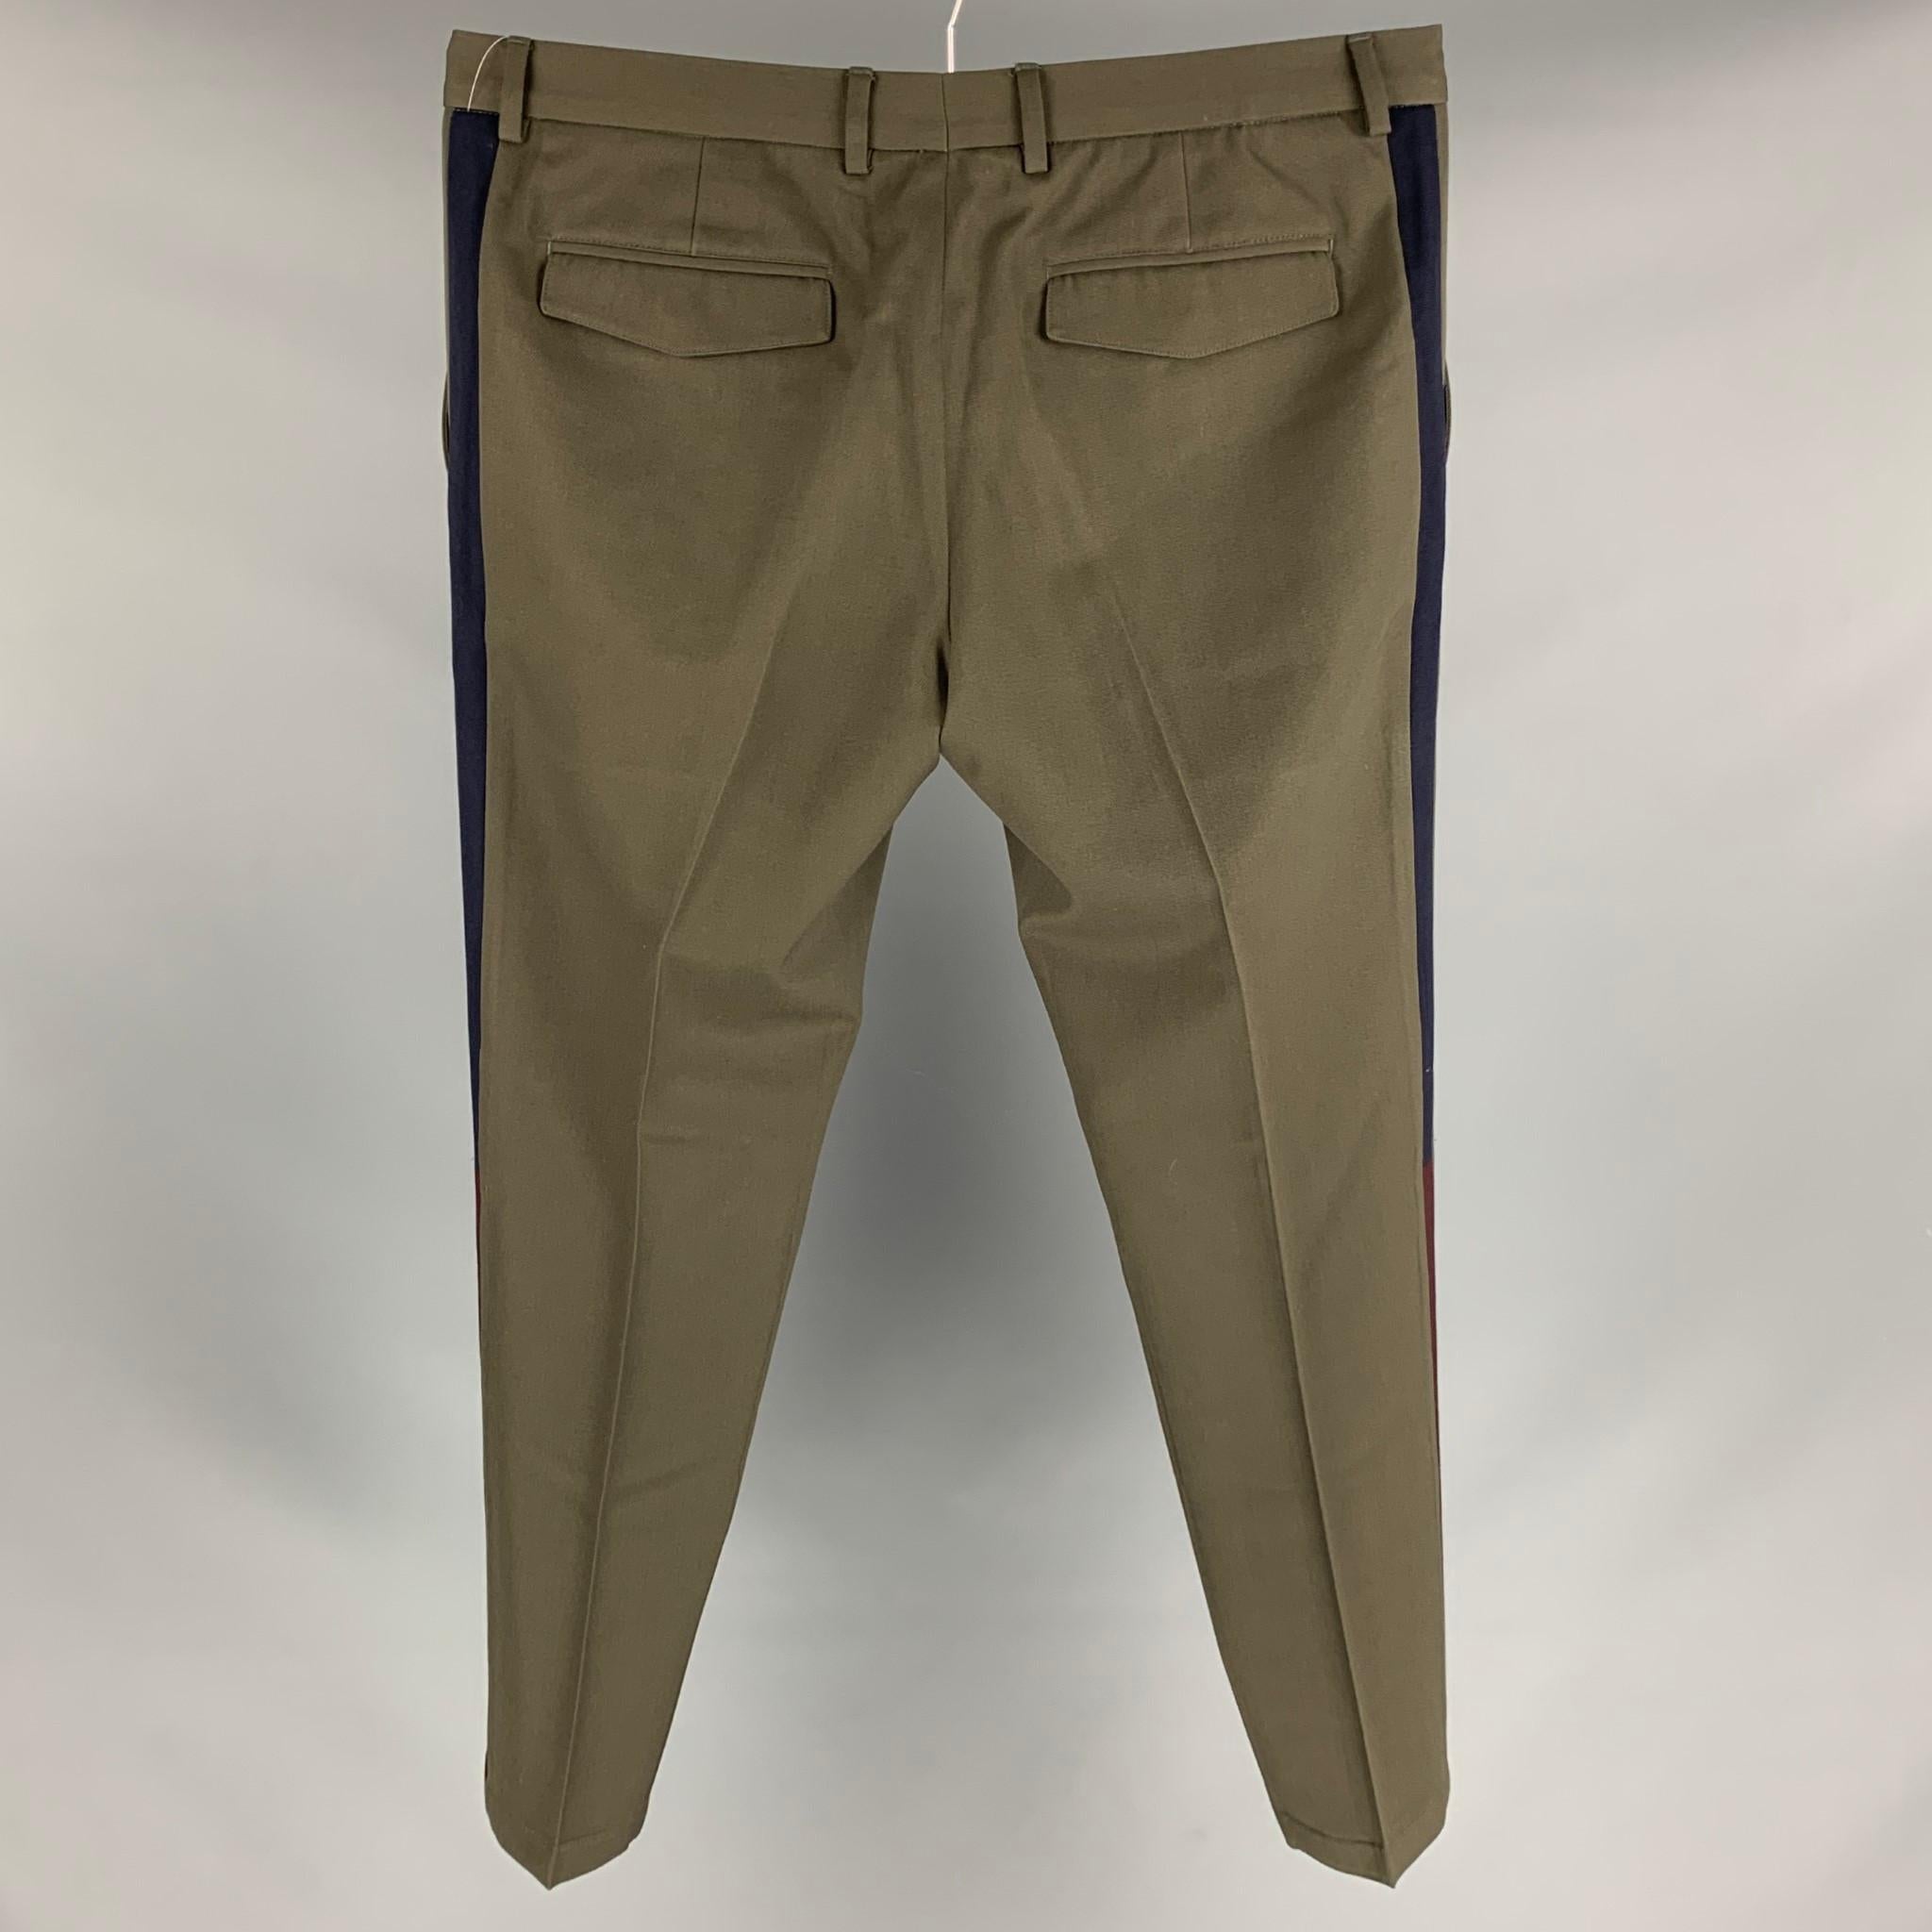 VALENTINO dress pants comes in a olive wool with a tuxedo stripe featuring a slim fit and a zip fly closure. Made in Italy. 

Very Good Pre-Owned Condition.
Marked: 50

Measurements:

Waist: 36 in.
Rise: 10 in.
Inseam: 29 in. 